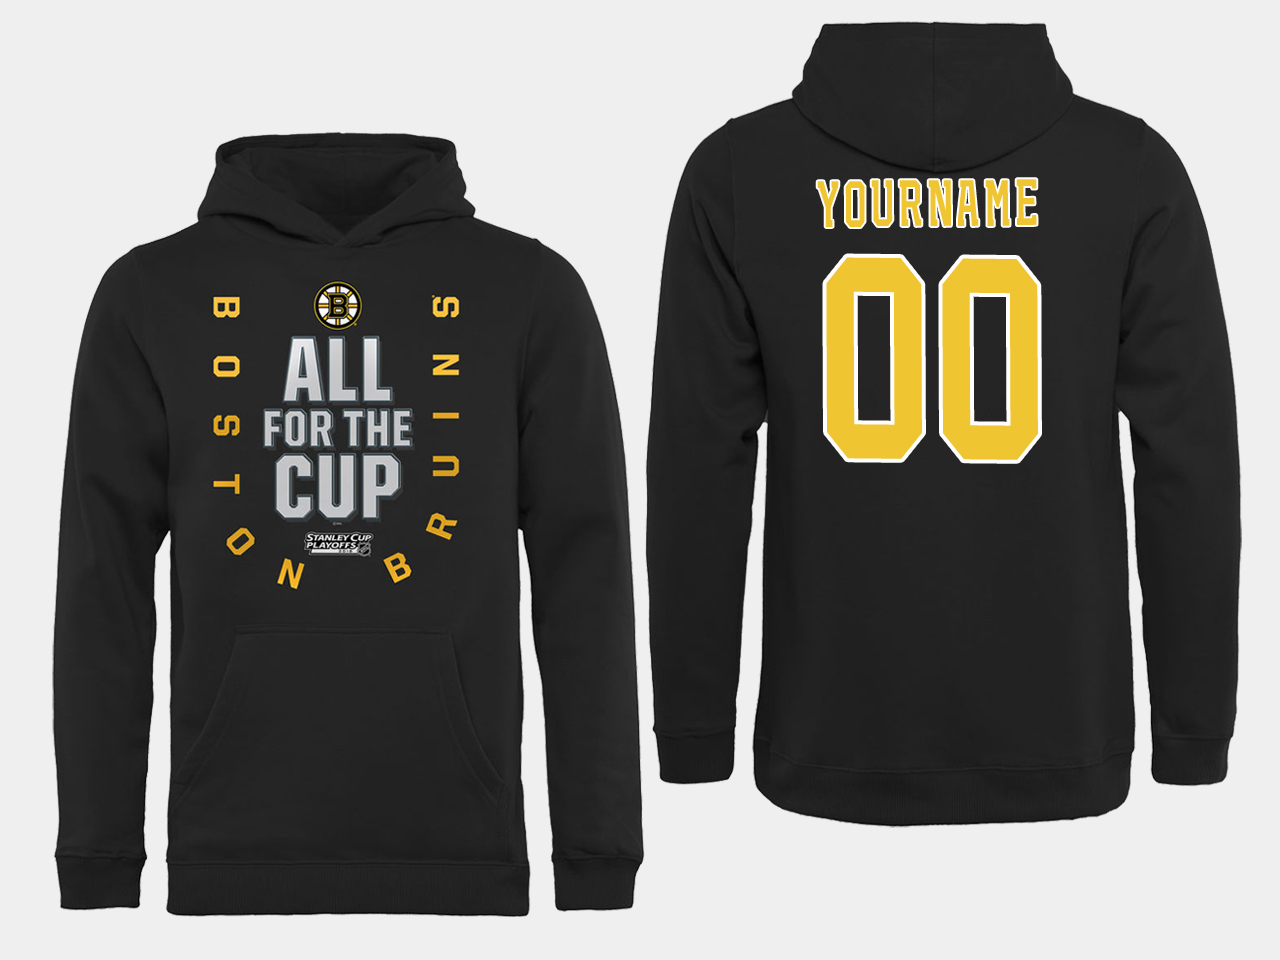 NHL Men Boston Bruins Customized Black All for the Cup Hoodie->boston bruins->NHL Jersey